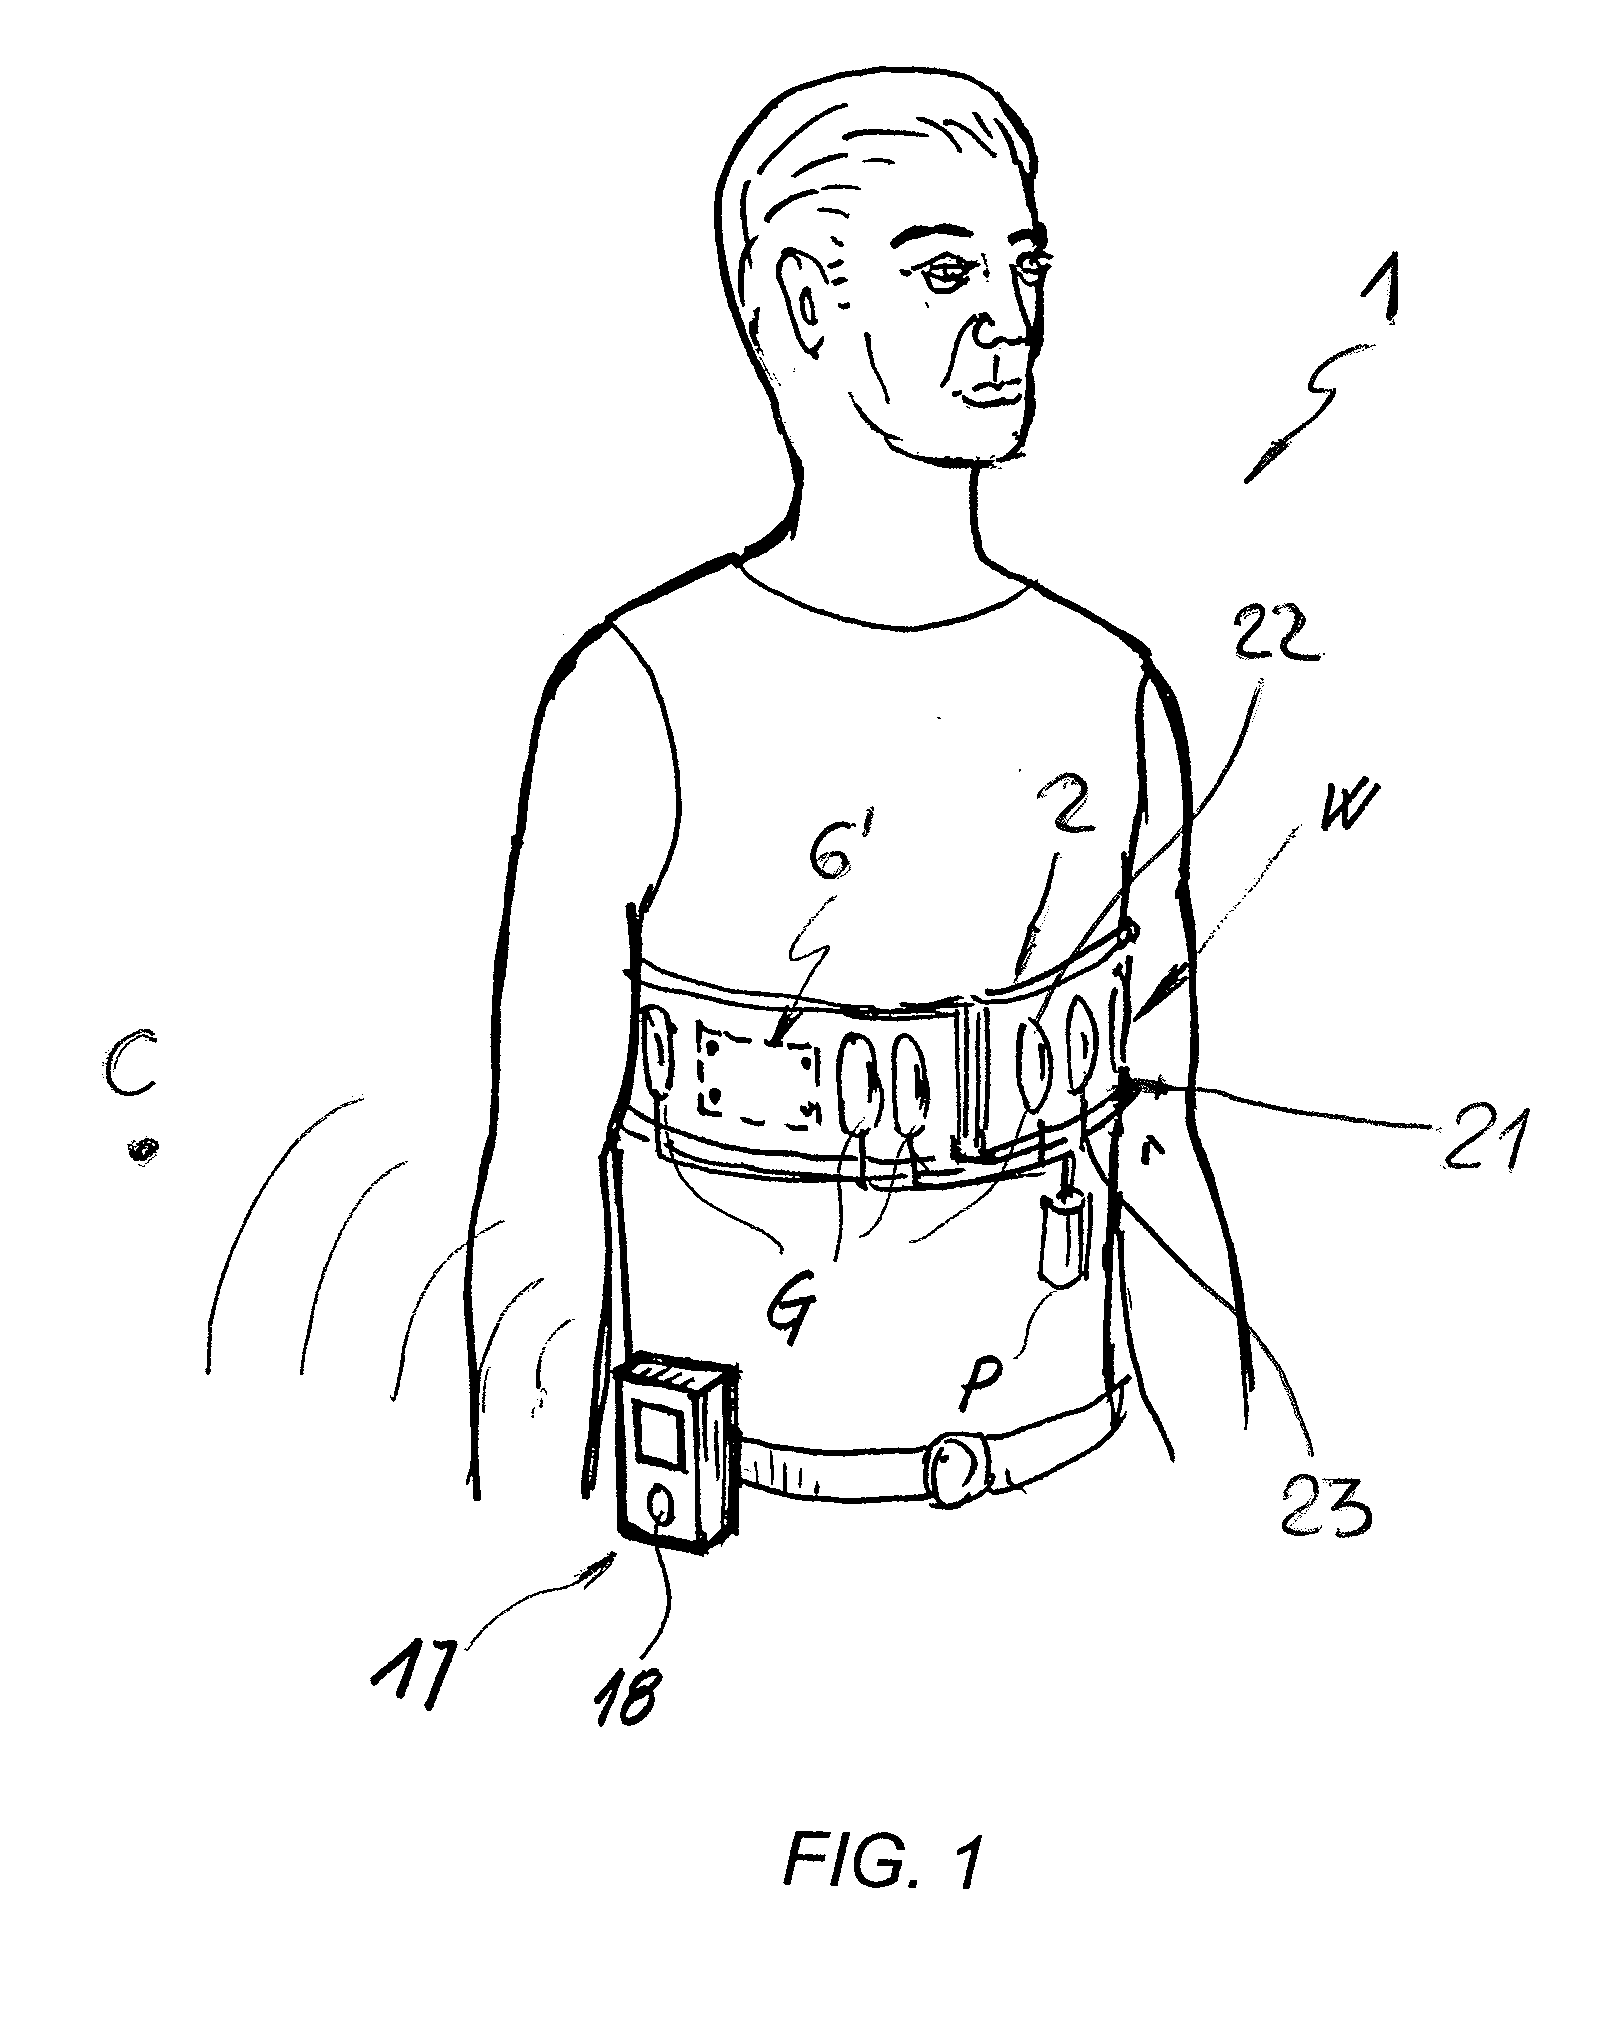 Sensor device for treatment and remote monitoring of vital biological parameters